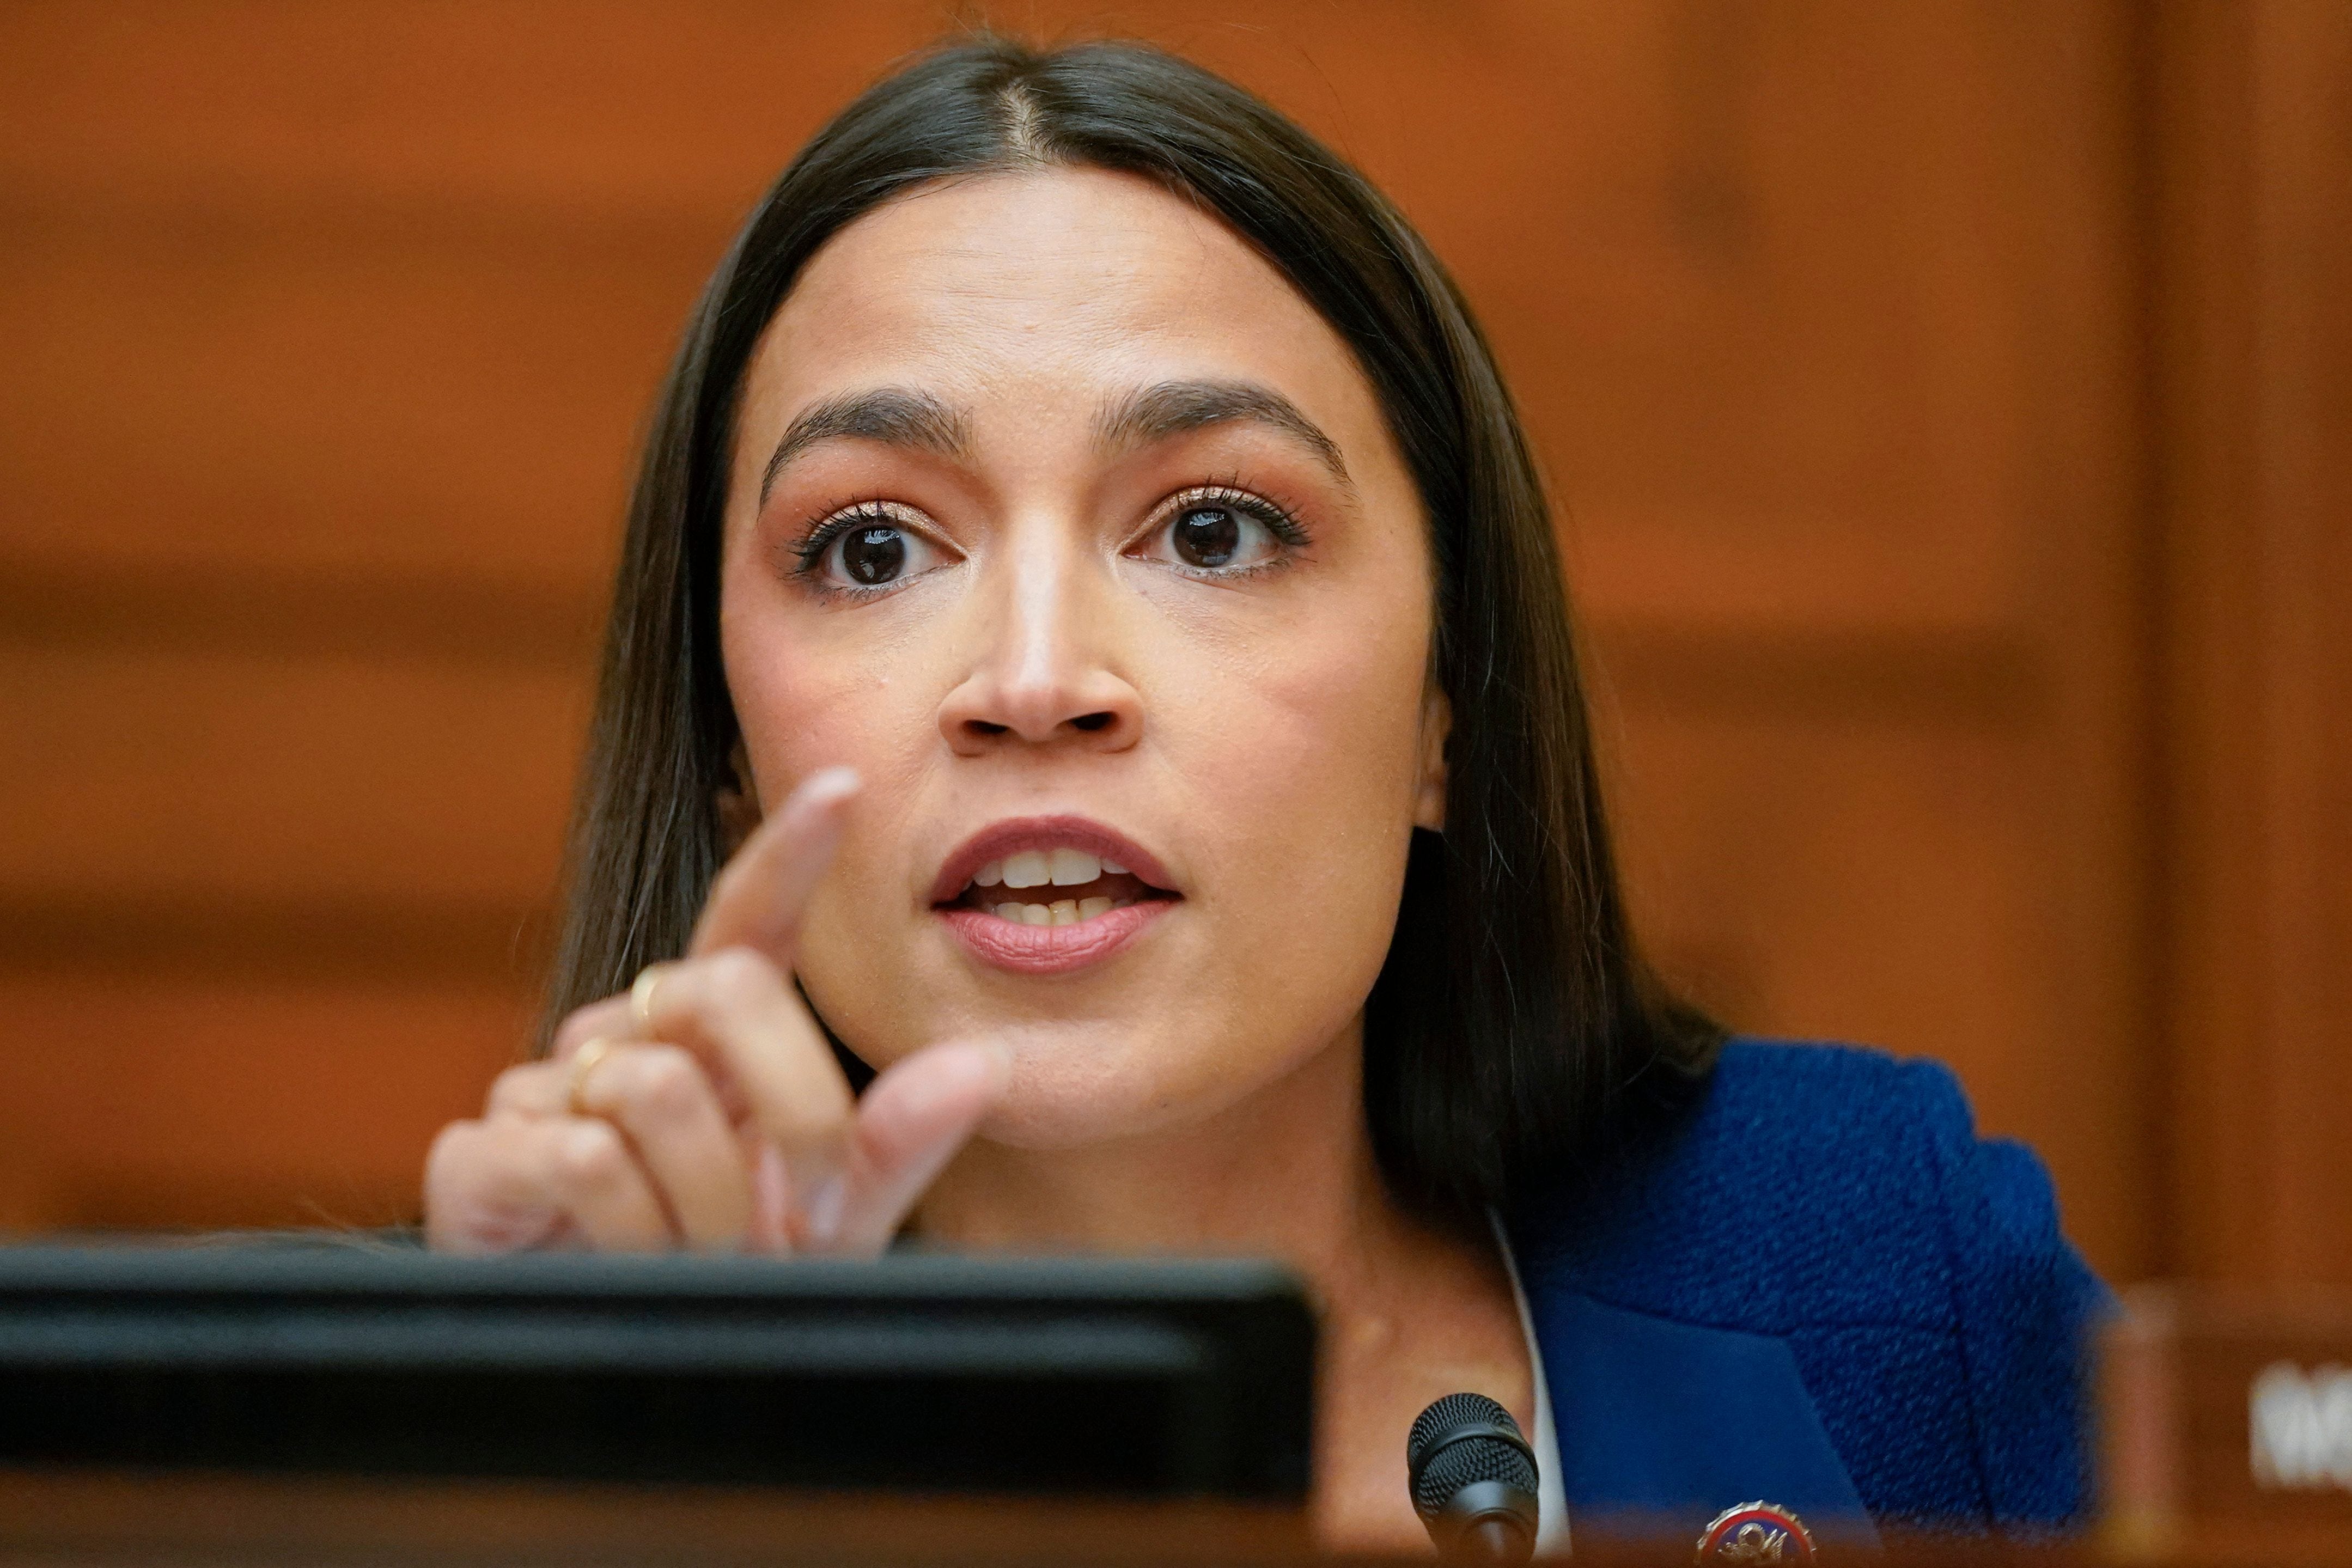 Alexandria Ocasio-Cortez speech targets Republicans after Ilhan Omar removed from committee